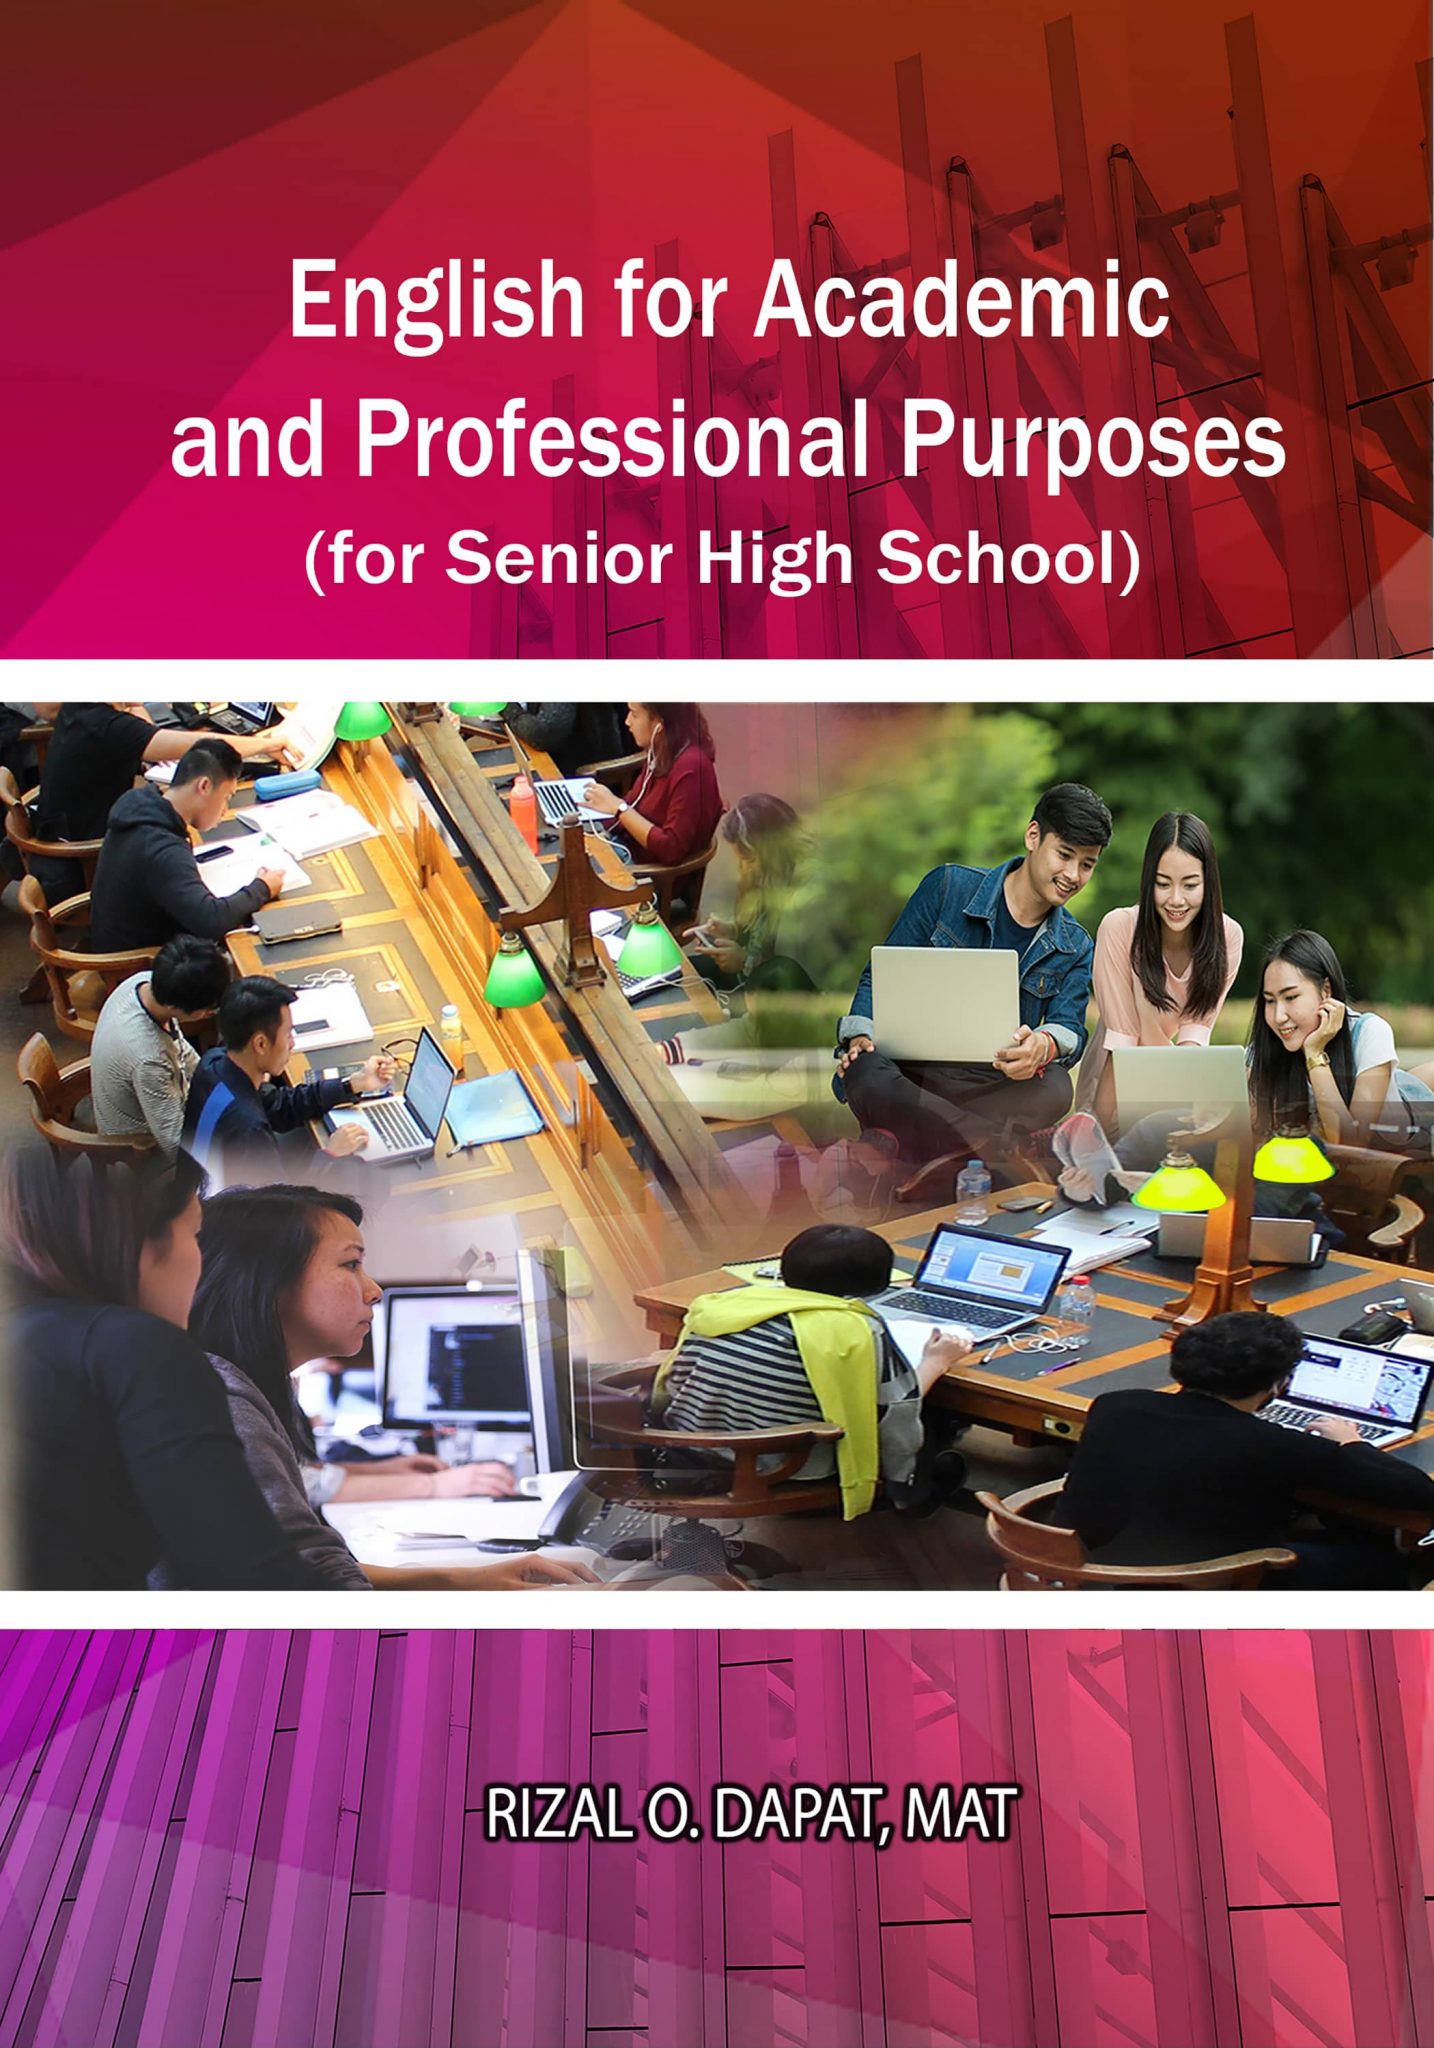 english-for-academic-and-professional-purposes-for-senior-high-school-books-atbp-publishing